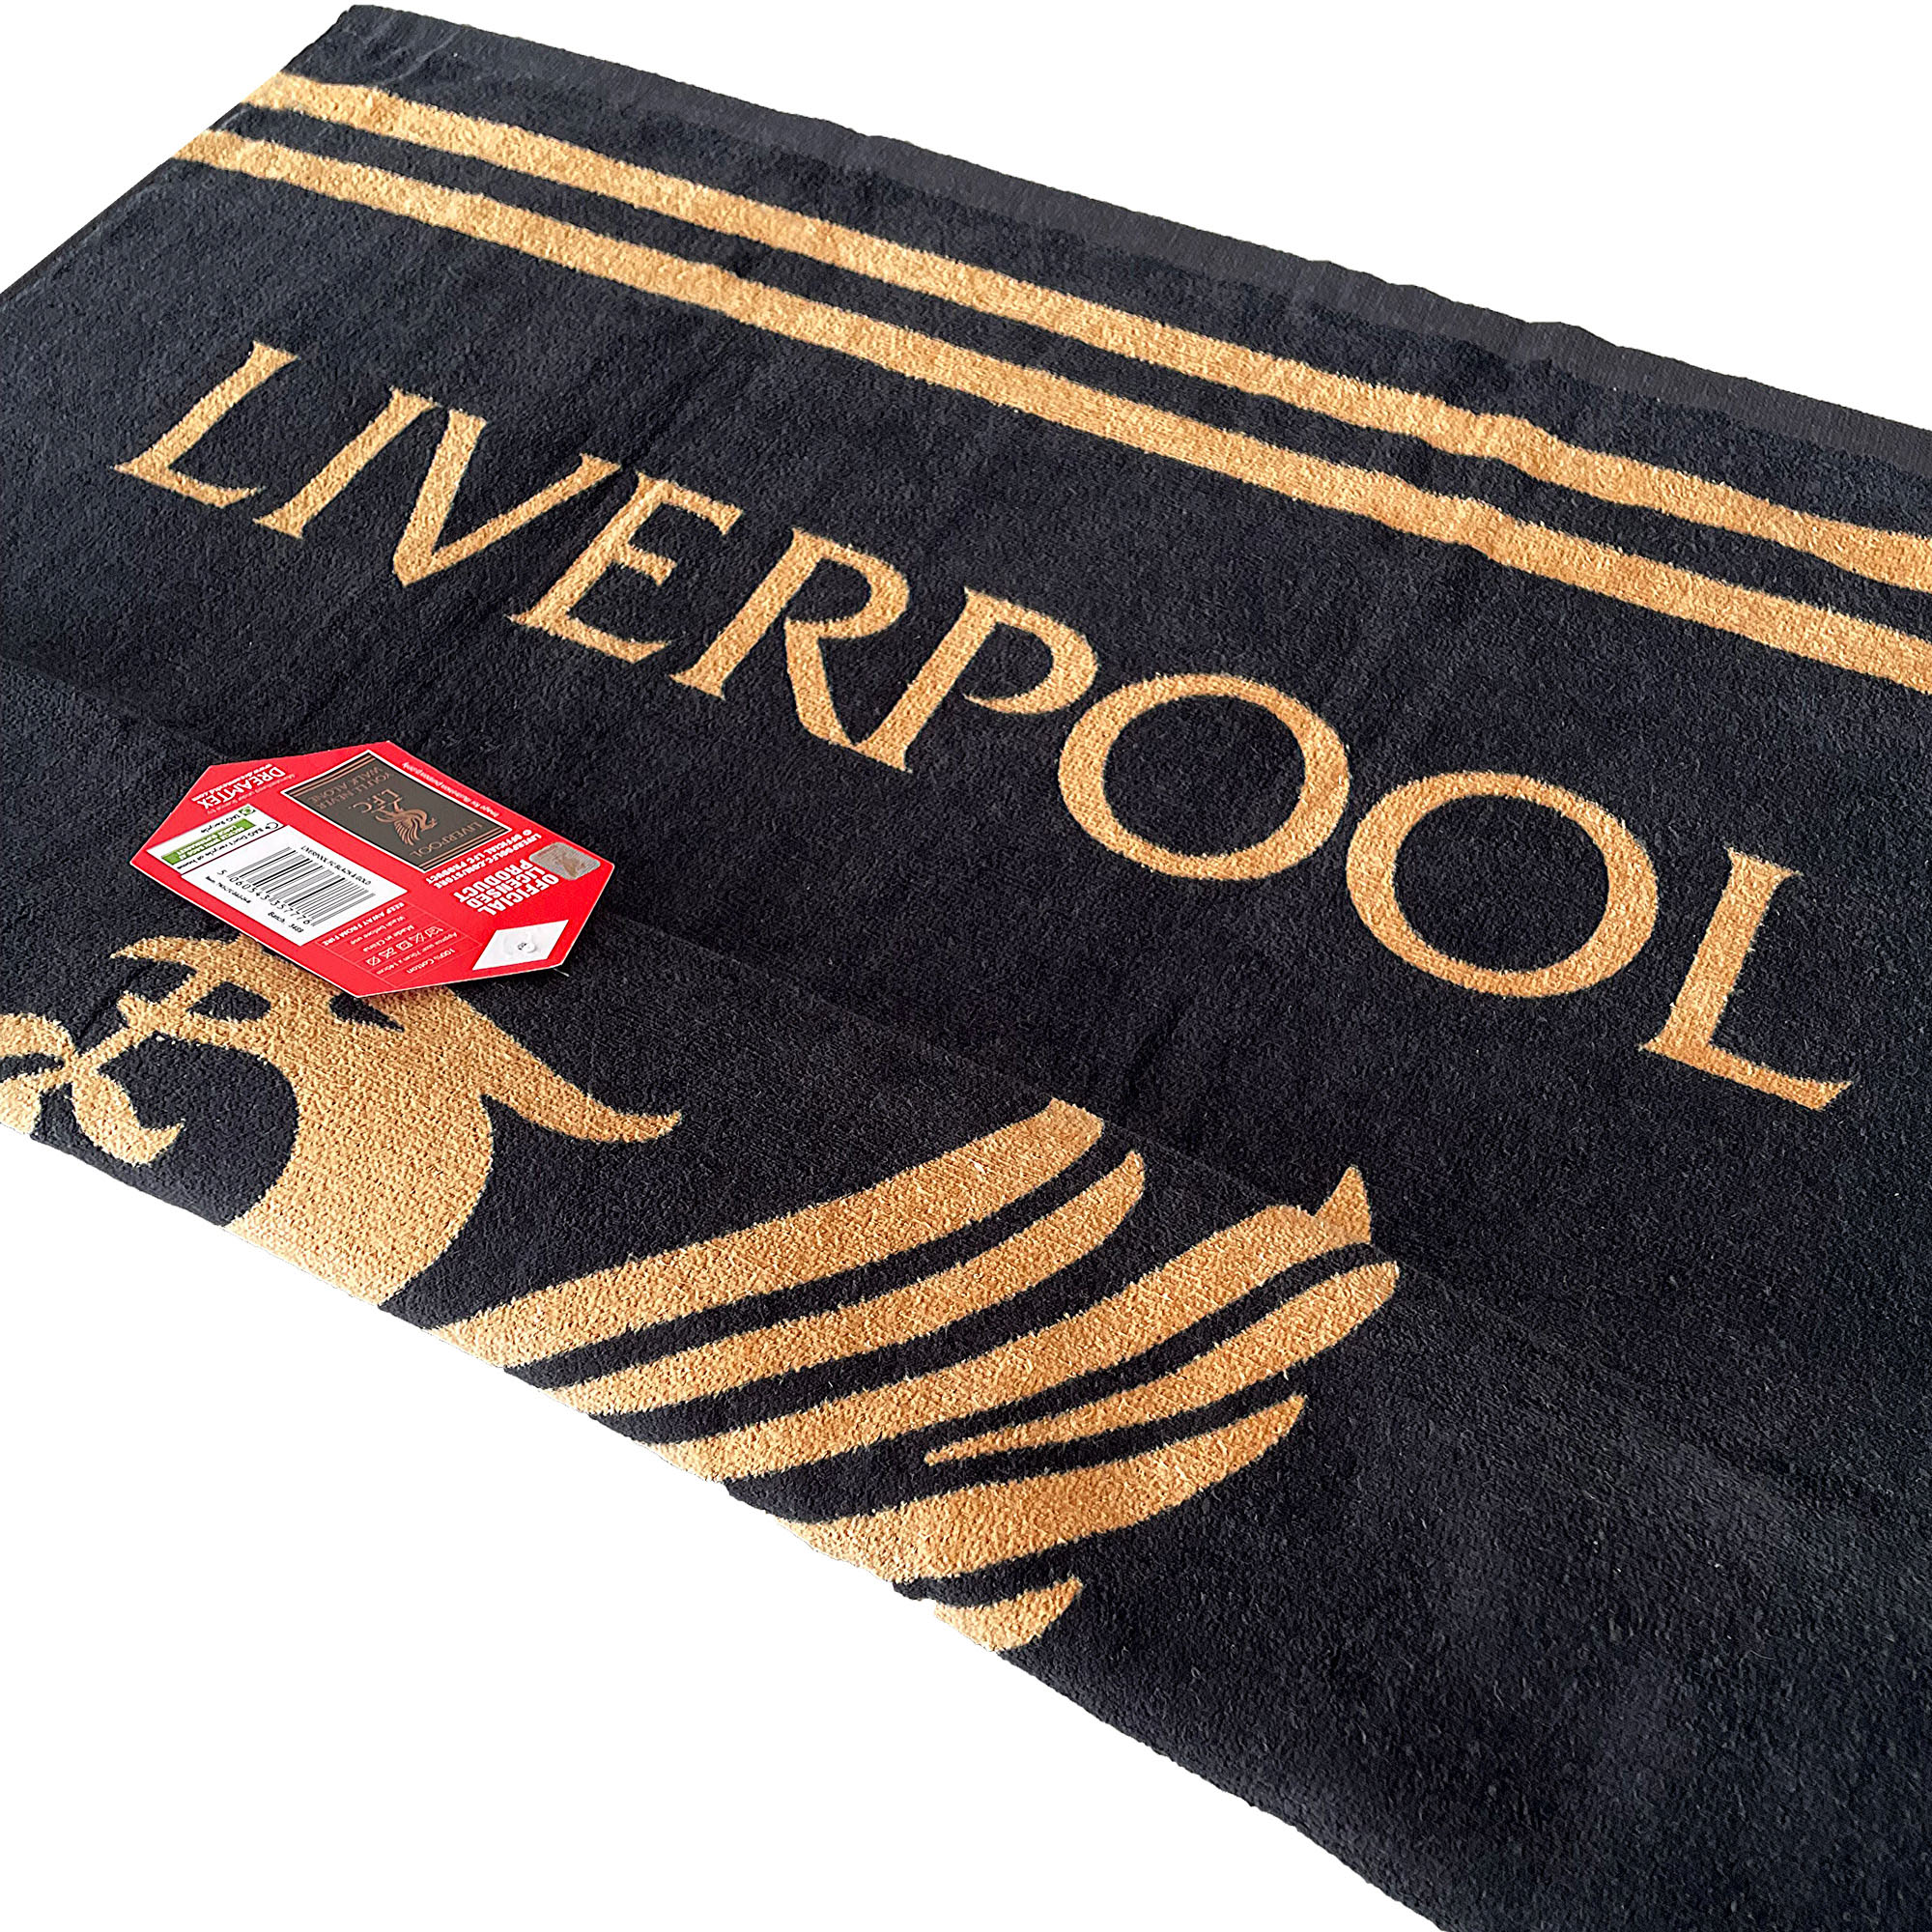 Official Liverpool Black & Gold Towel